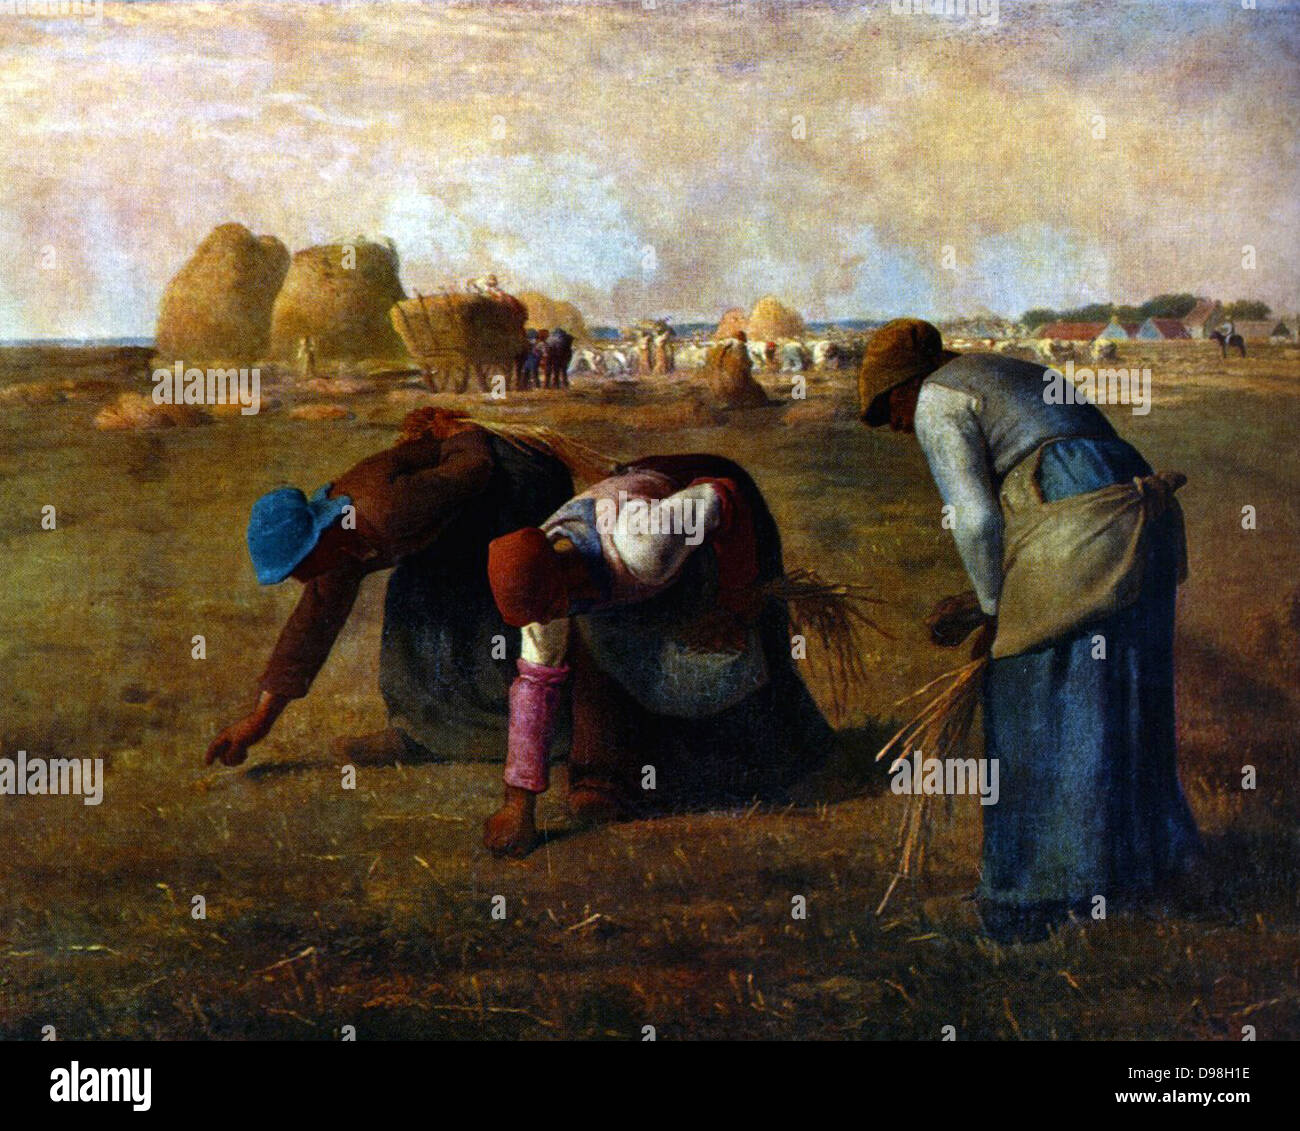 Jean-Francois Millet, The Gleaners (1857) Stock Photo